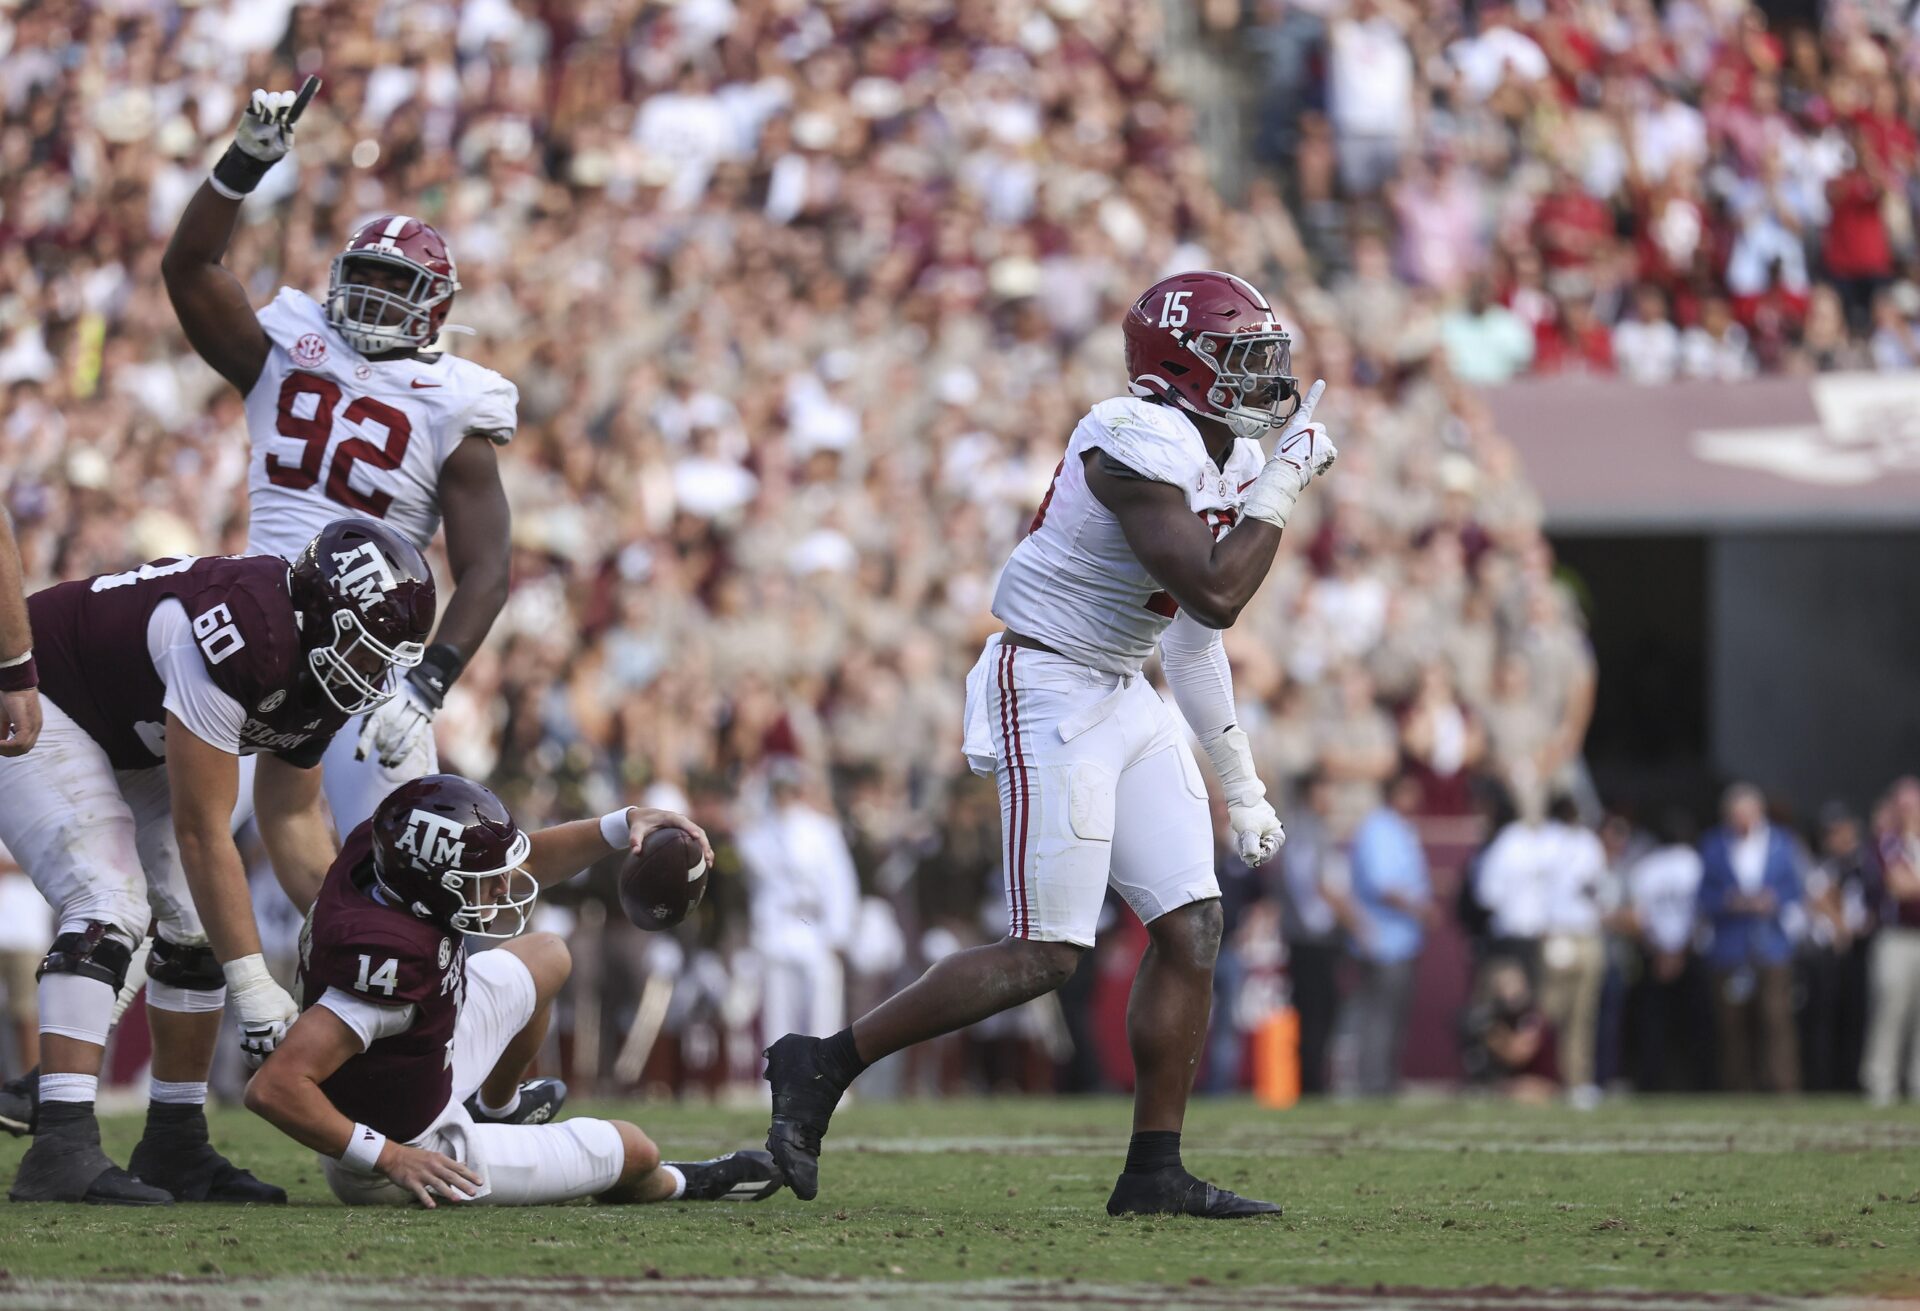 Dallas Turner (15) reacts after a play during the fourth quarter against the Texas A&M Aggies at Kyle Field.